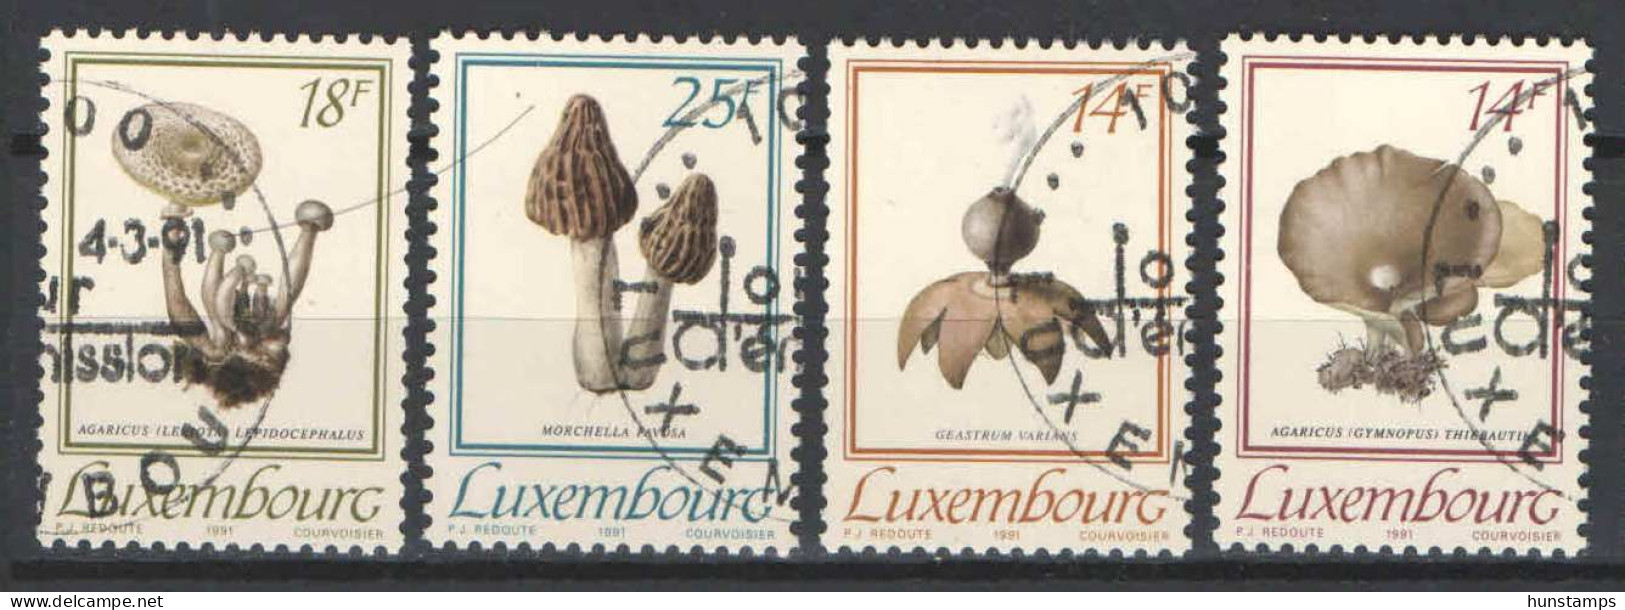 Luxembourg 1991. Mushrooms Nice Set, Used - Used Stamps